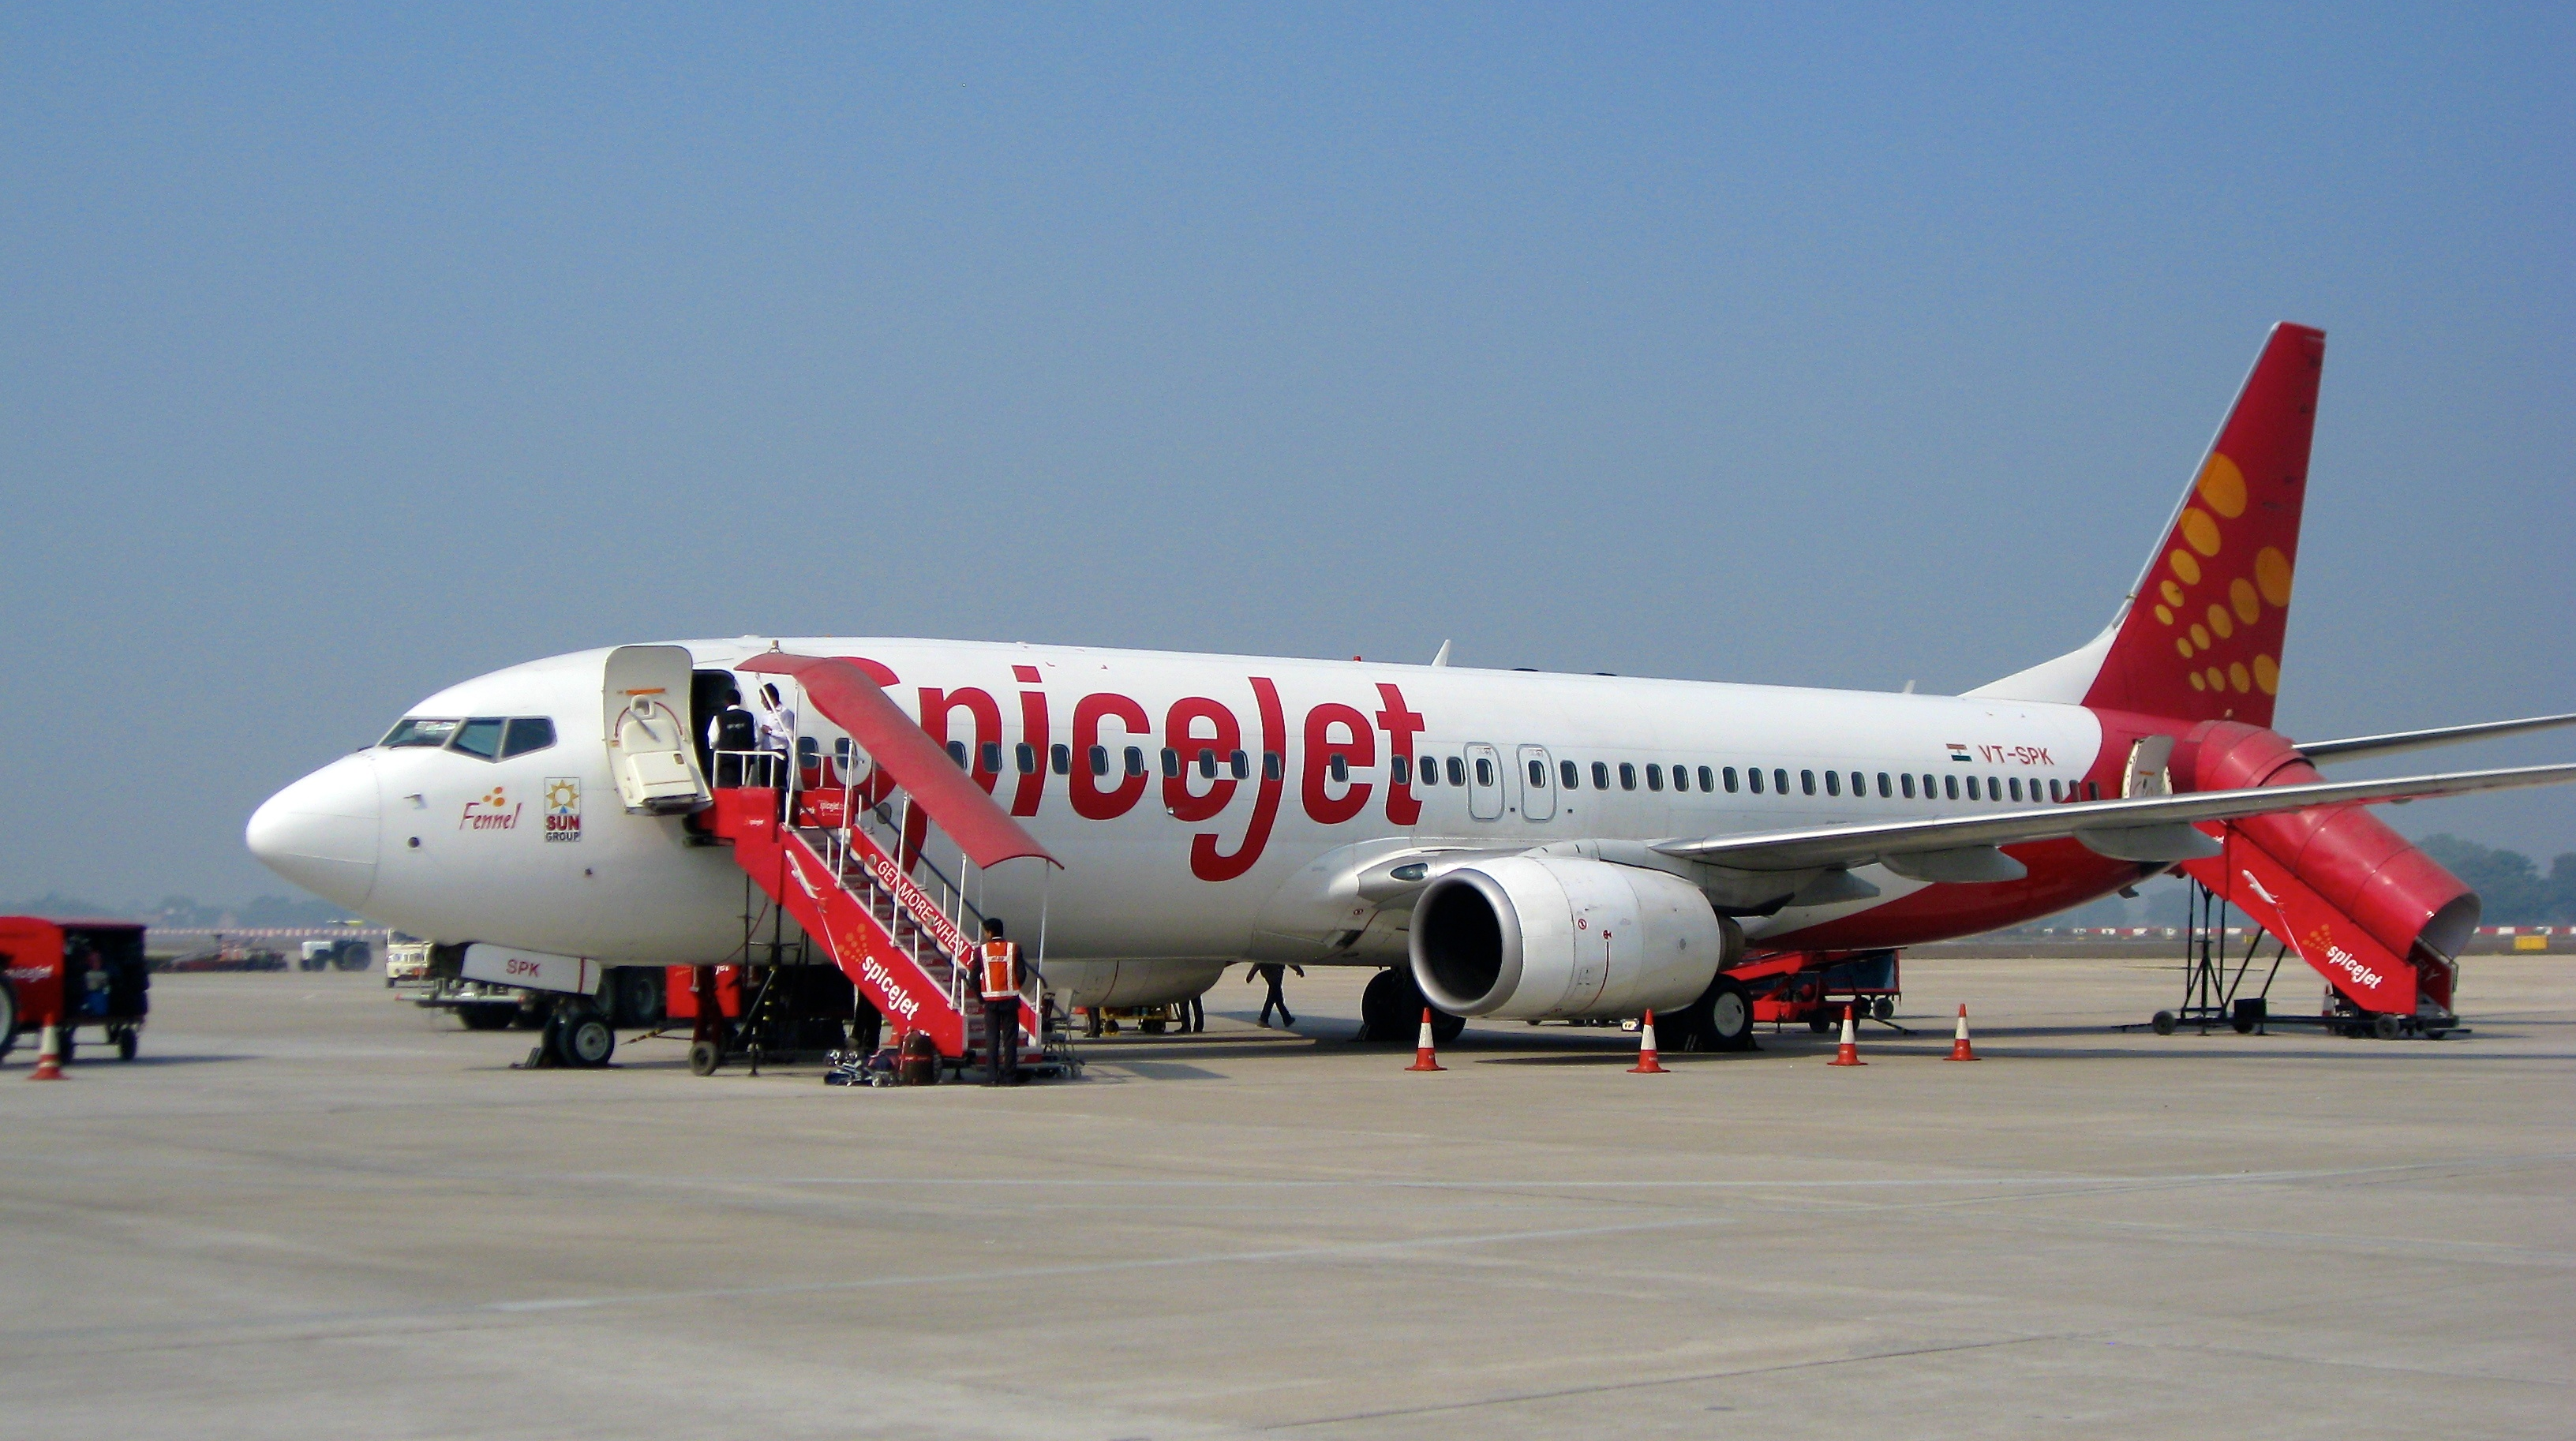 SpiceJet asked to operate 50% flights for 8 weeks after safety concerns 